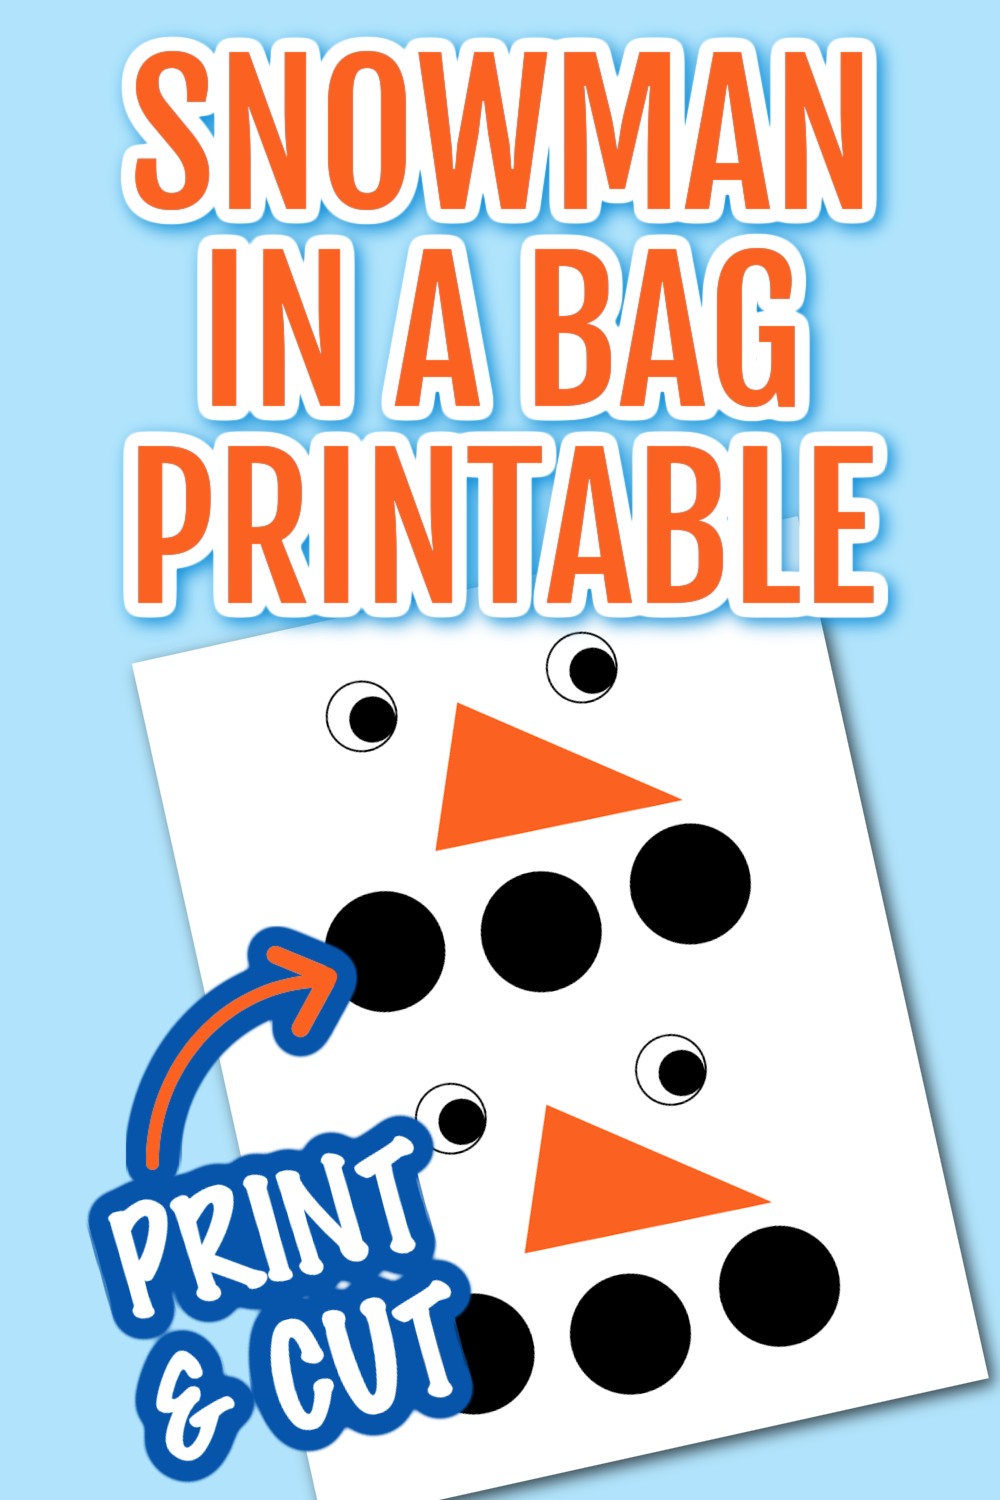 Free printable snowman face for snowman in a bag kids craft.